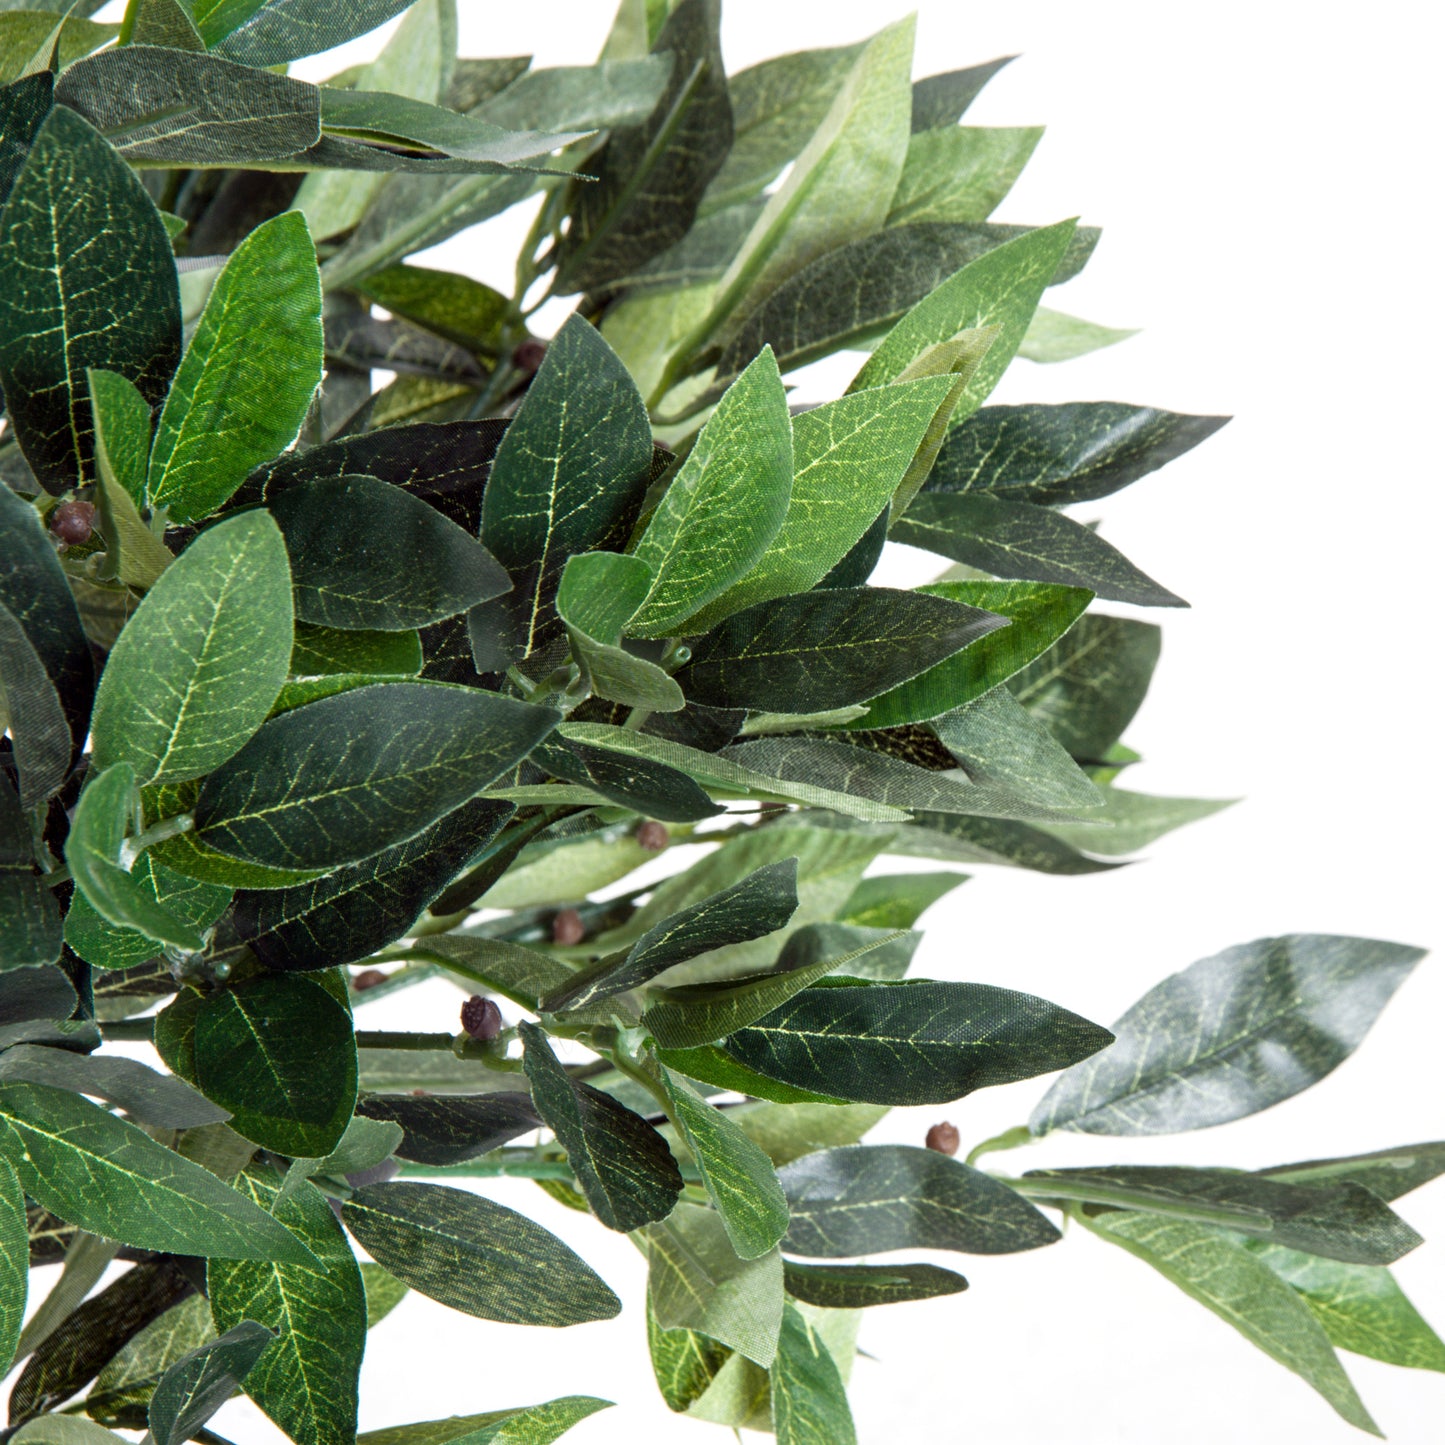 Outsunny Artificial Olive Tree Plant, 90 cm